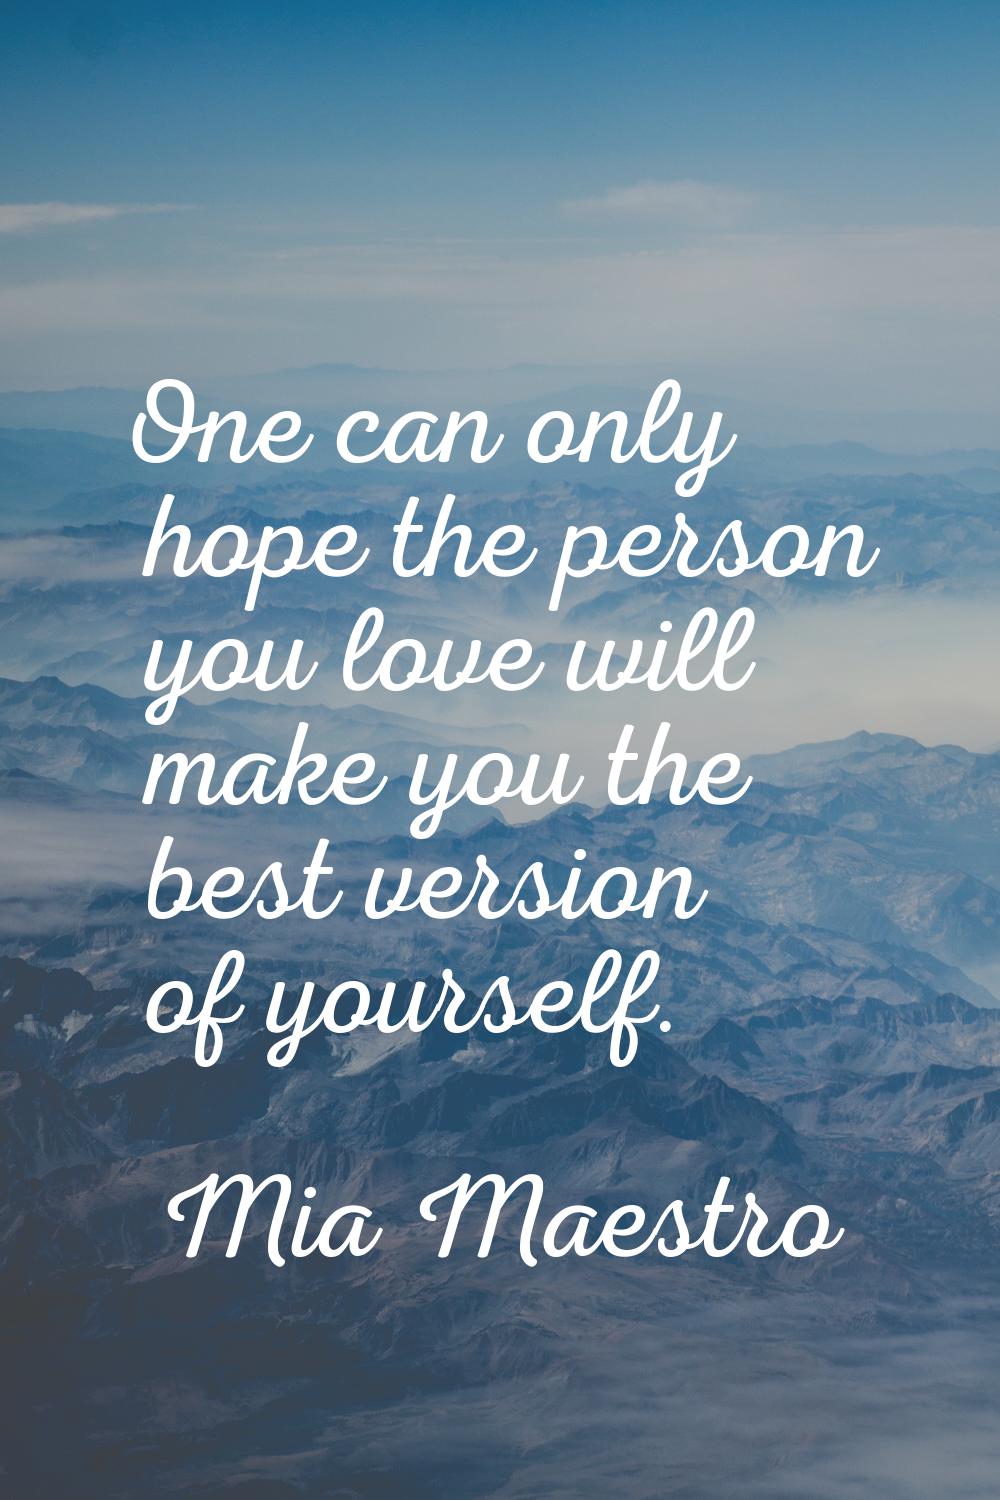 One can only hope the person you love will make you the best version of yourself.